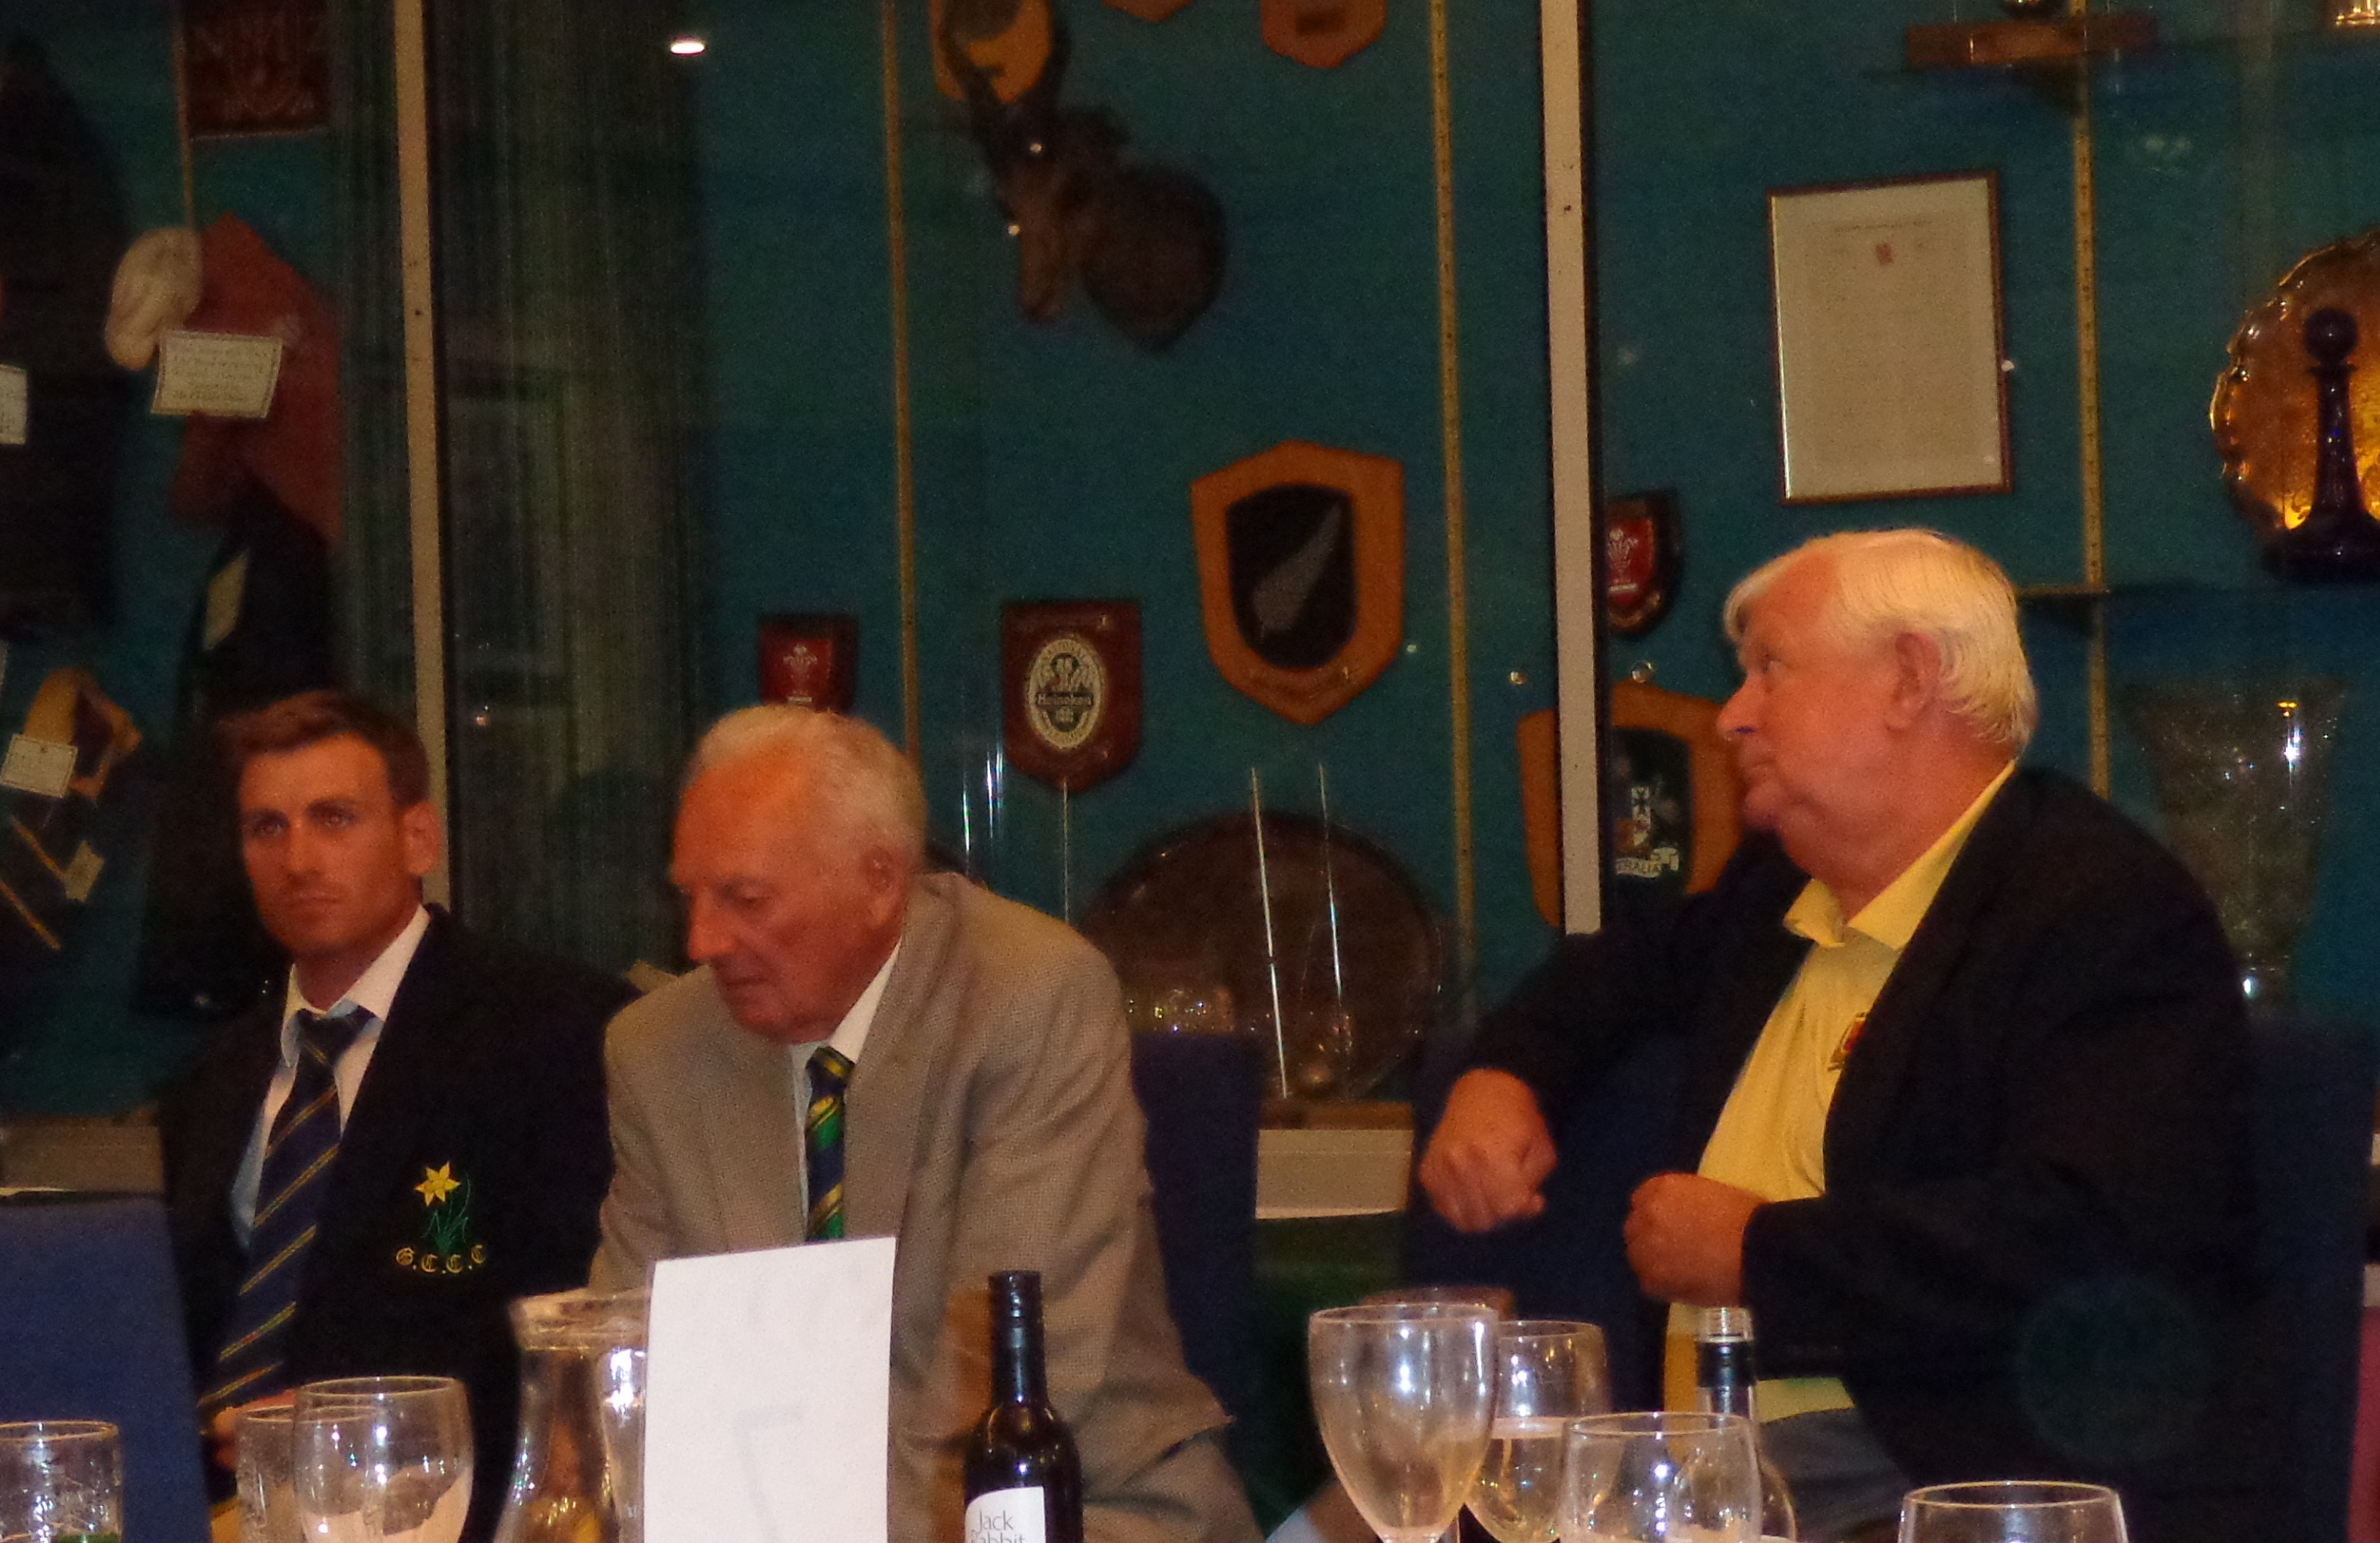 Mark Wallace, Don Shepherd and Malcolm Nash at Mark Wallace's Benefit Evening at St. Helen's, 2013